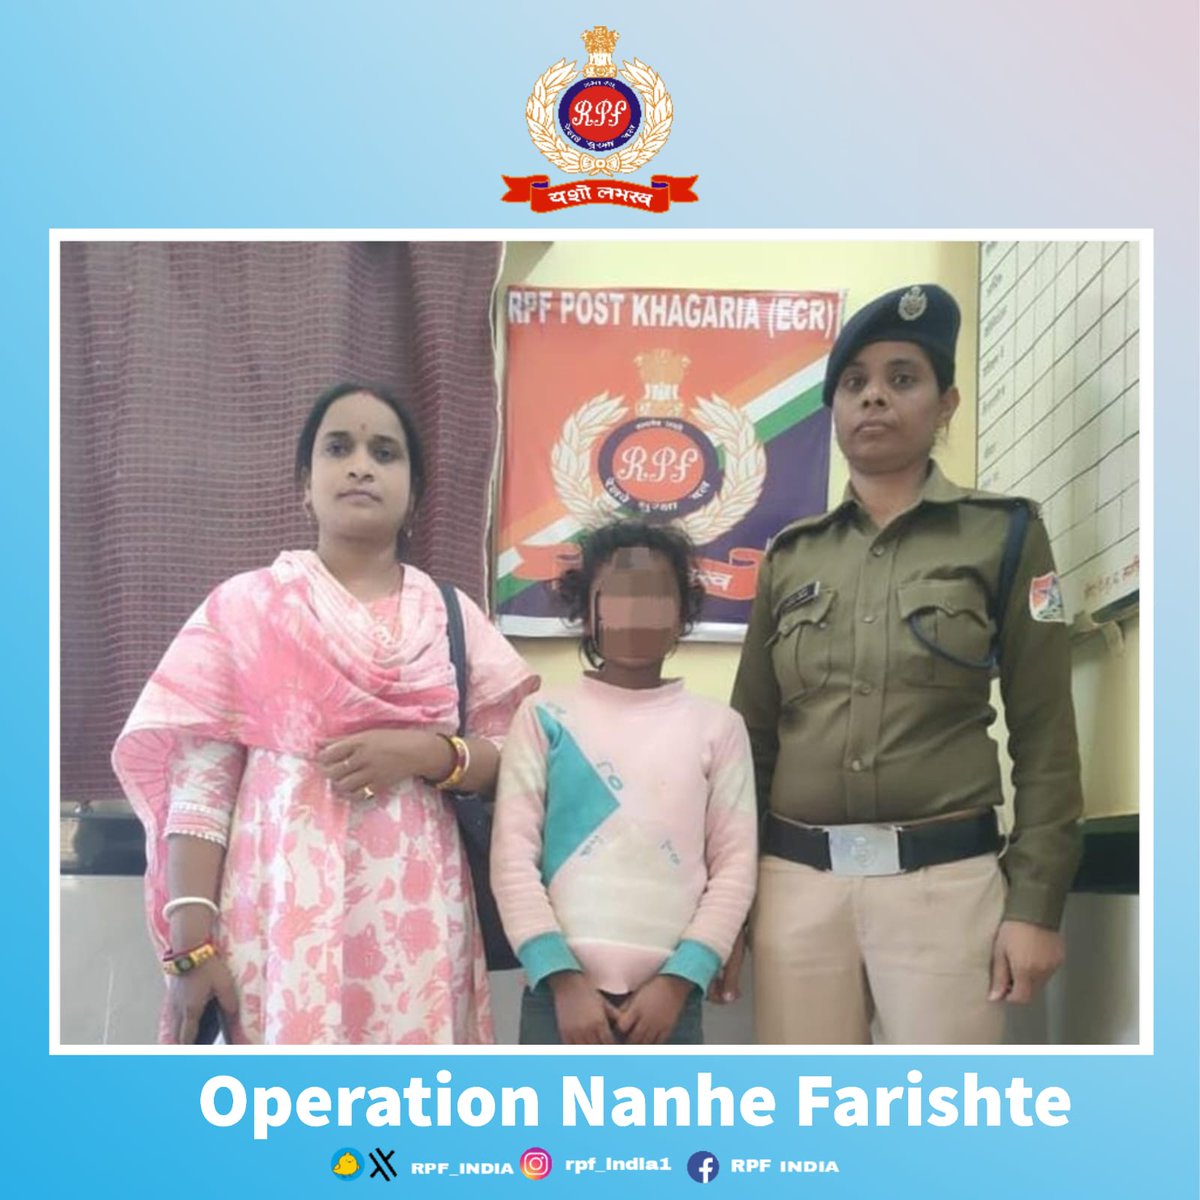 Exemplifying duty and empathy together, #RPF Khagaria rescued a 10 years old girl from a distress situation. 
We stand to eliminate child exploitation and ensure every child's right to a safe & nurturing environment. 
#OperationNanheFarishte #ChildRescue #WeServeAndProtect